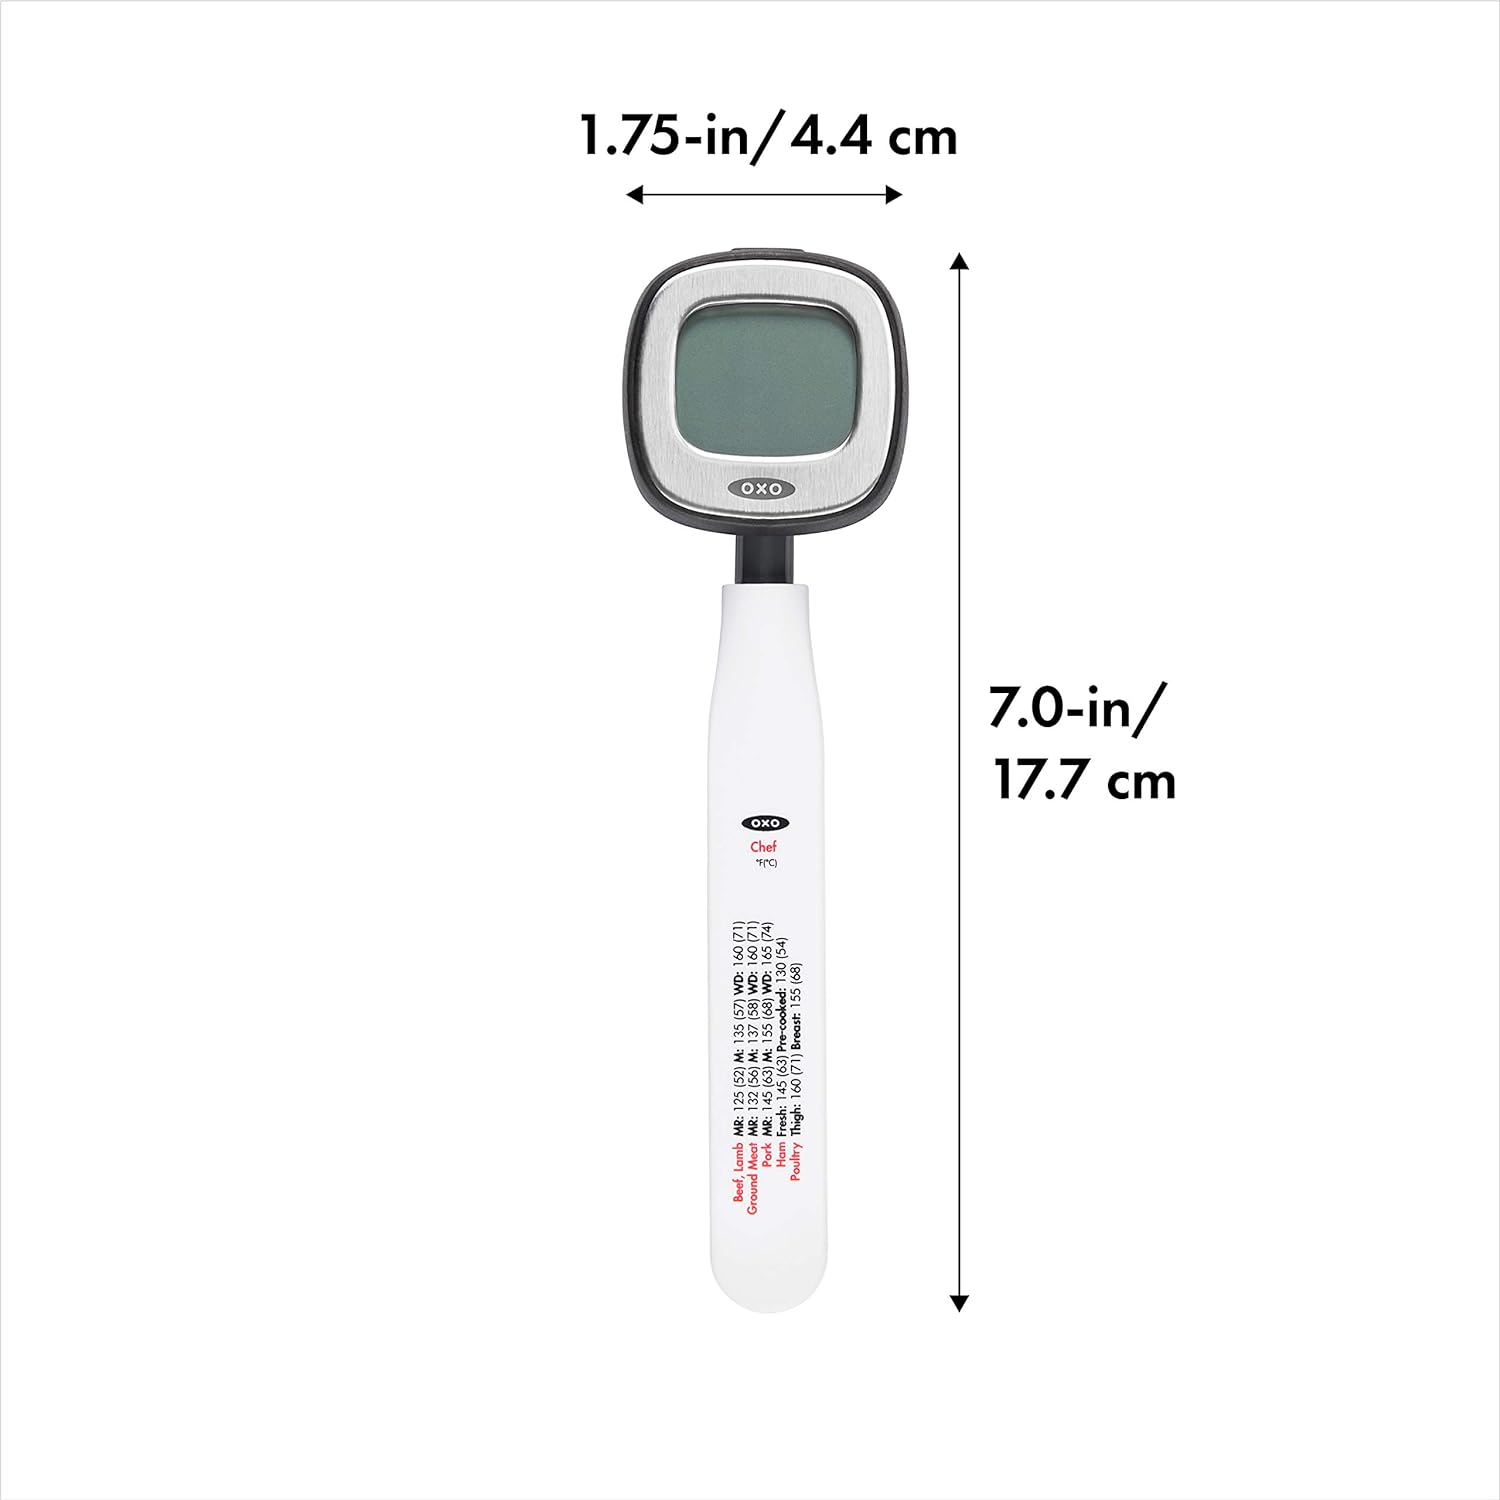 OXO Good Grips Chefs Precision Digital Instant Read Thermometer, Black